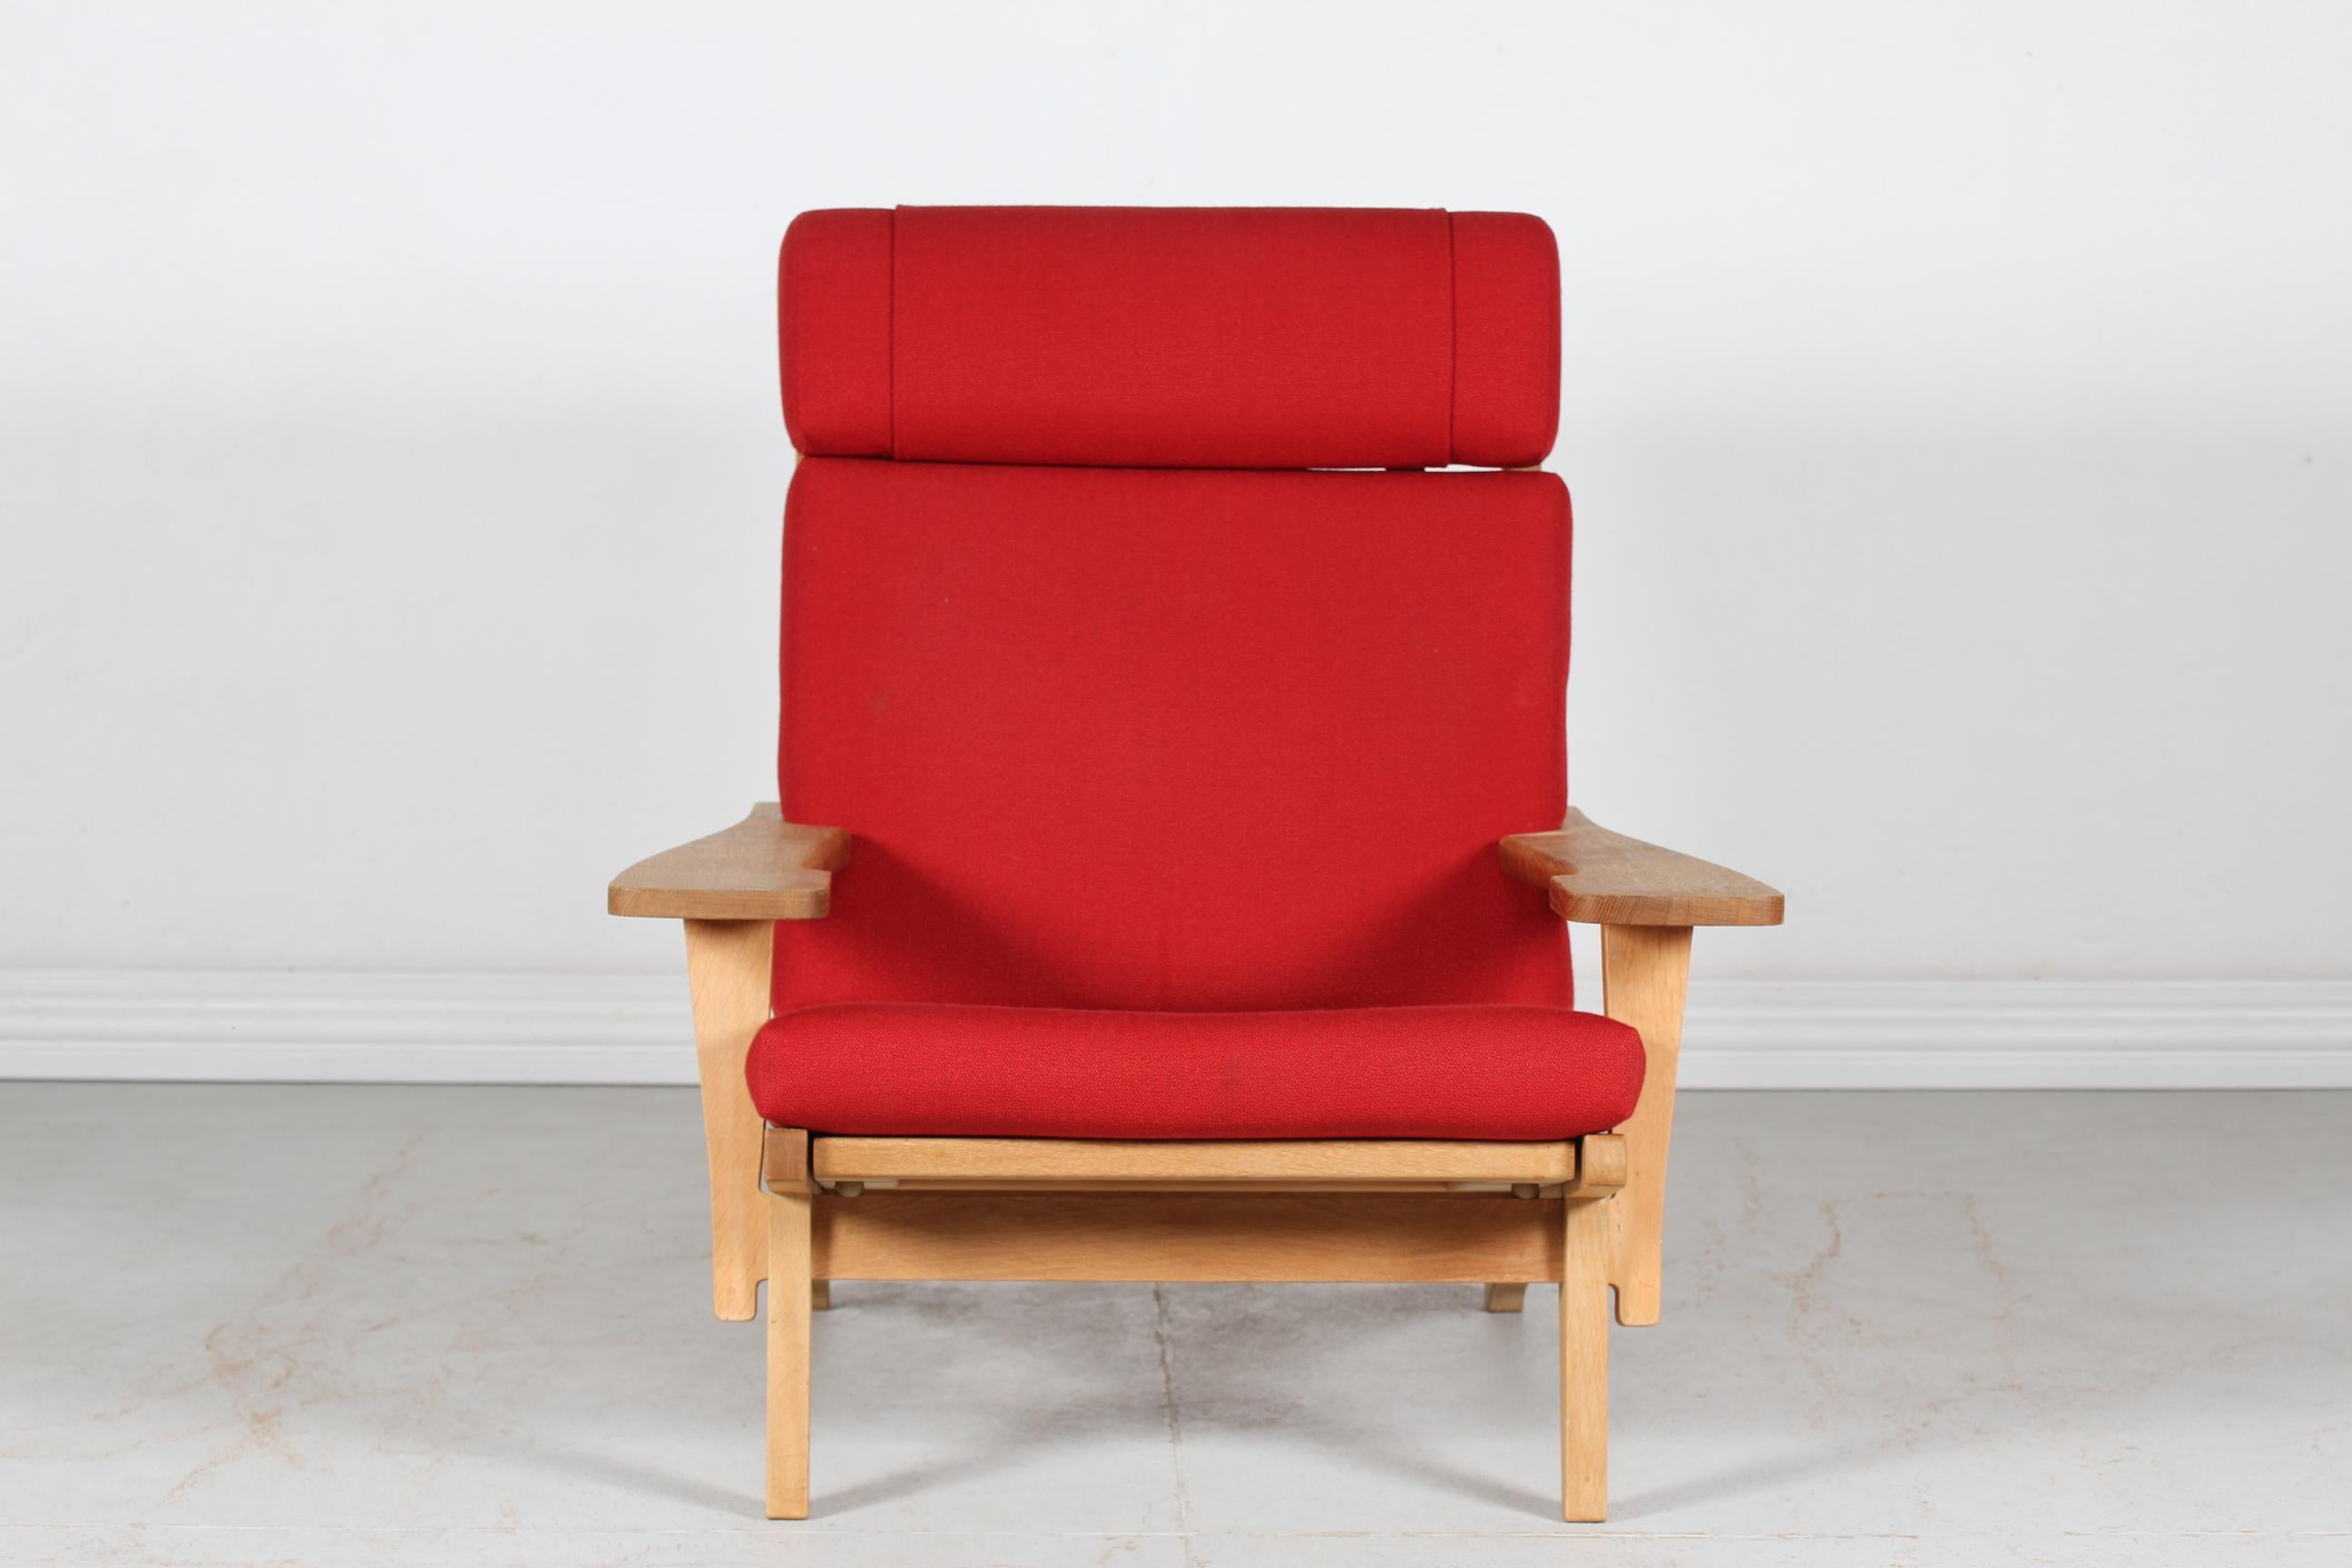 Lounge chair model GE 375 with high backrest by Danish designer Hans J. Wegner (1914-2007) in 1969.
The chair is manufactured in the 1970s and made of solid oak with the original cushions upholstered with red fabric.

Nice vintage condition with